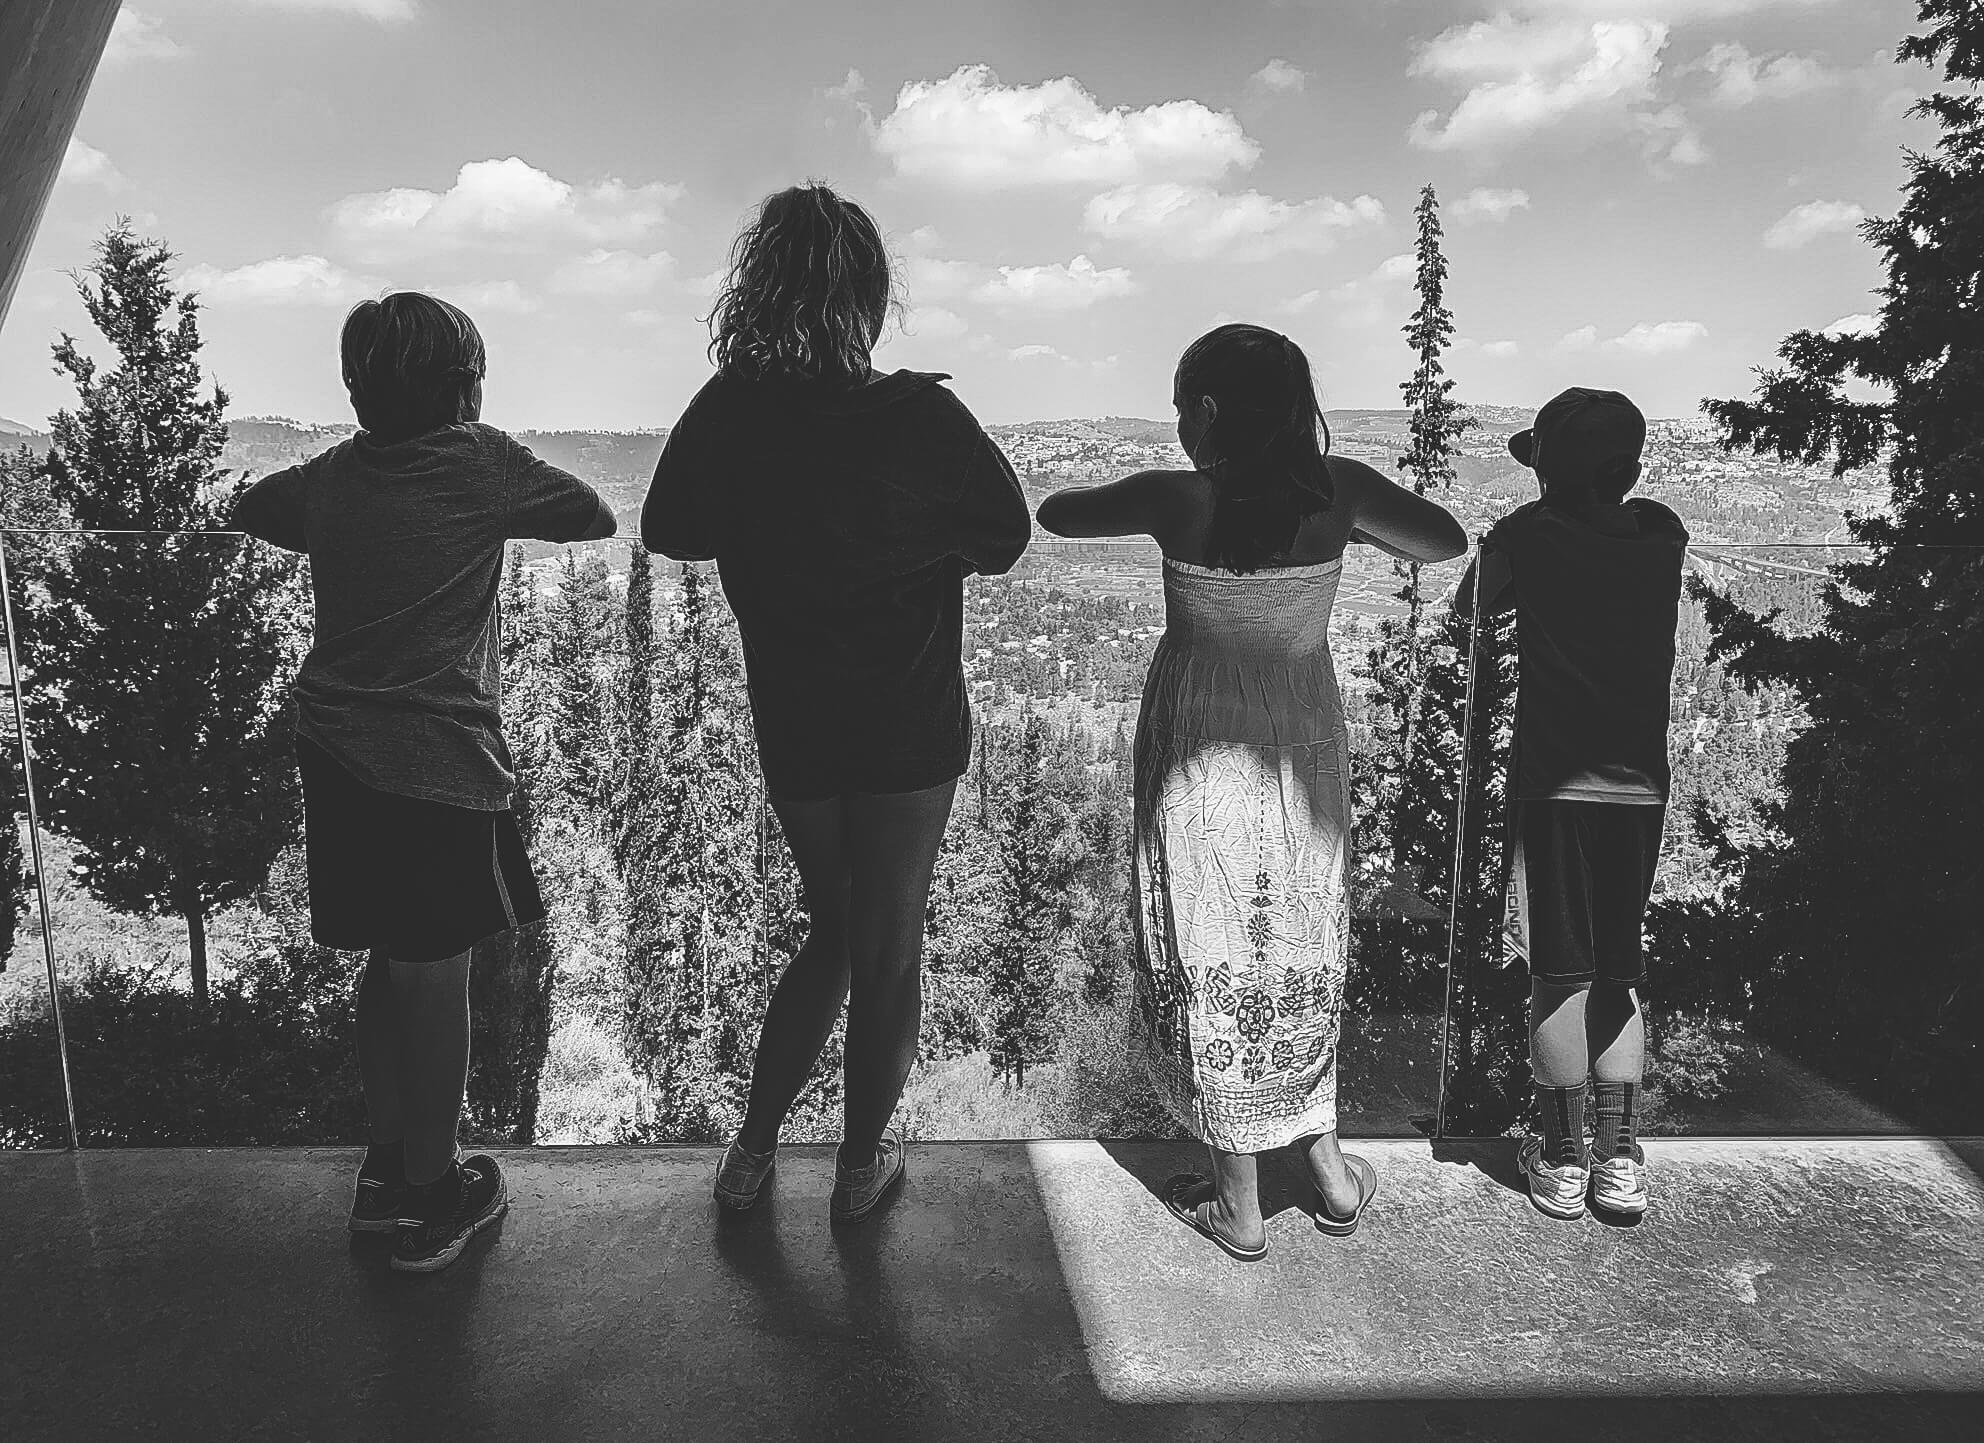 Four children stand outside against a plexiglass balcony shield. The children look down at the forest below.